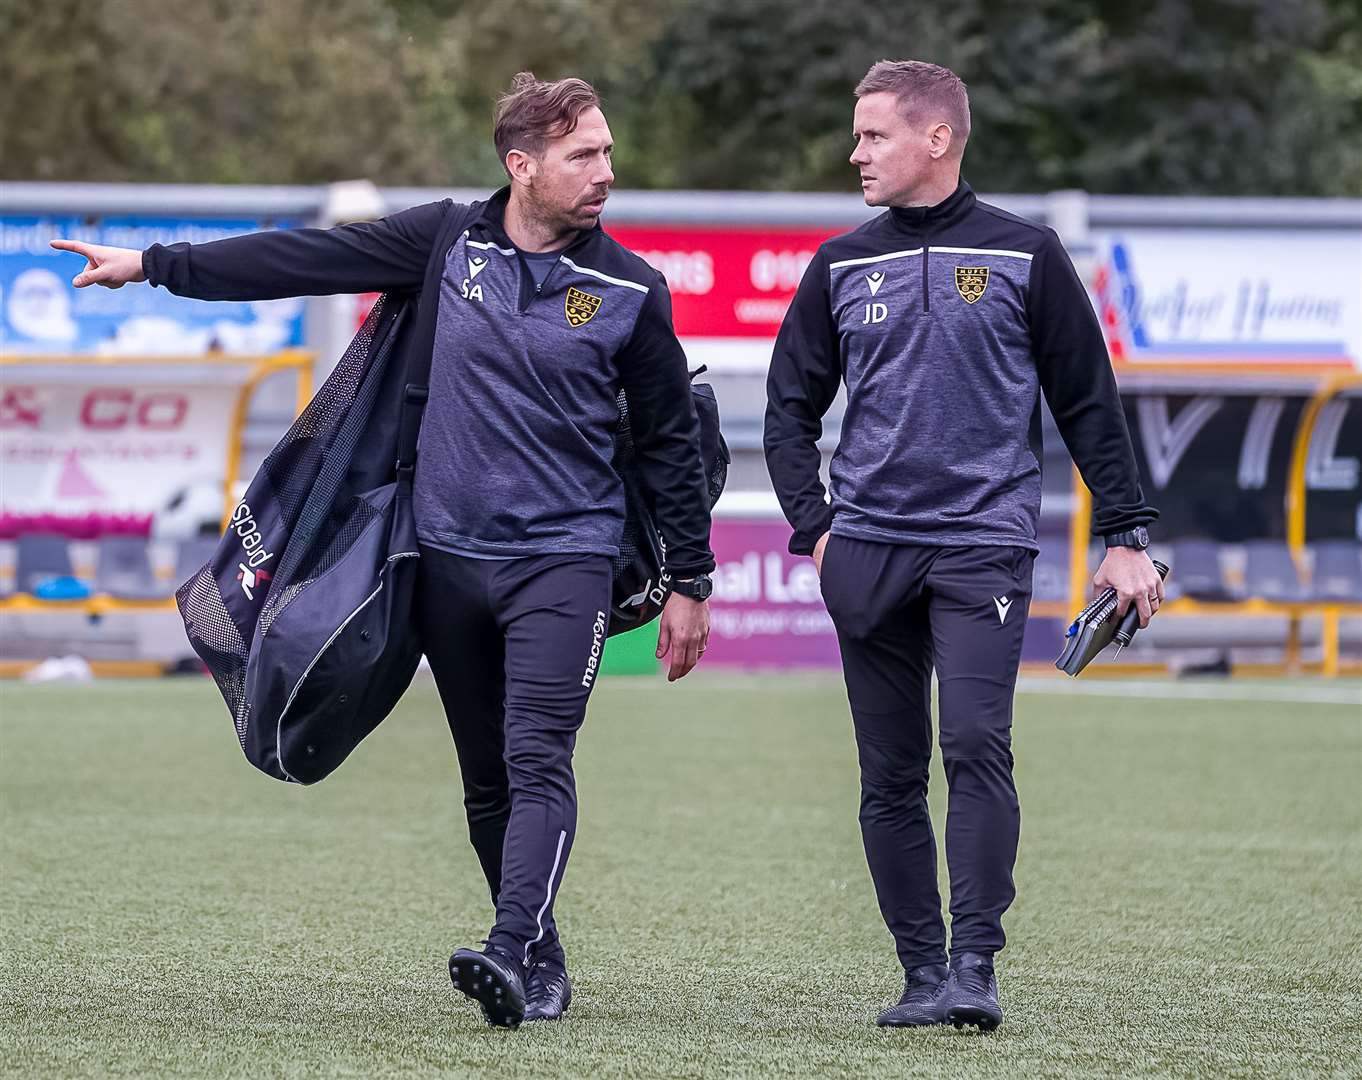 Simon Austin and Joe Dowley have left Maidstone United under-23s Picture: Helen Cooper